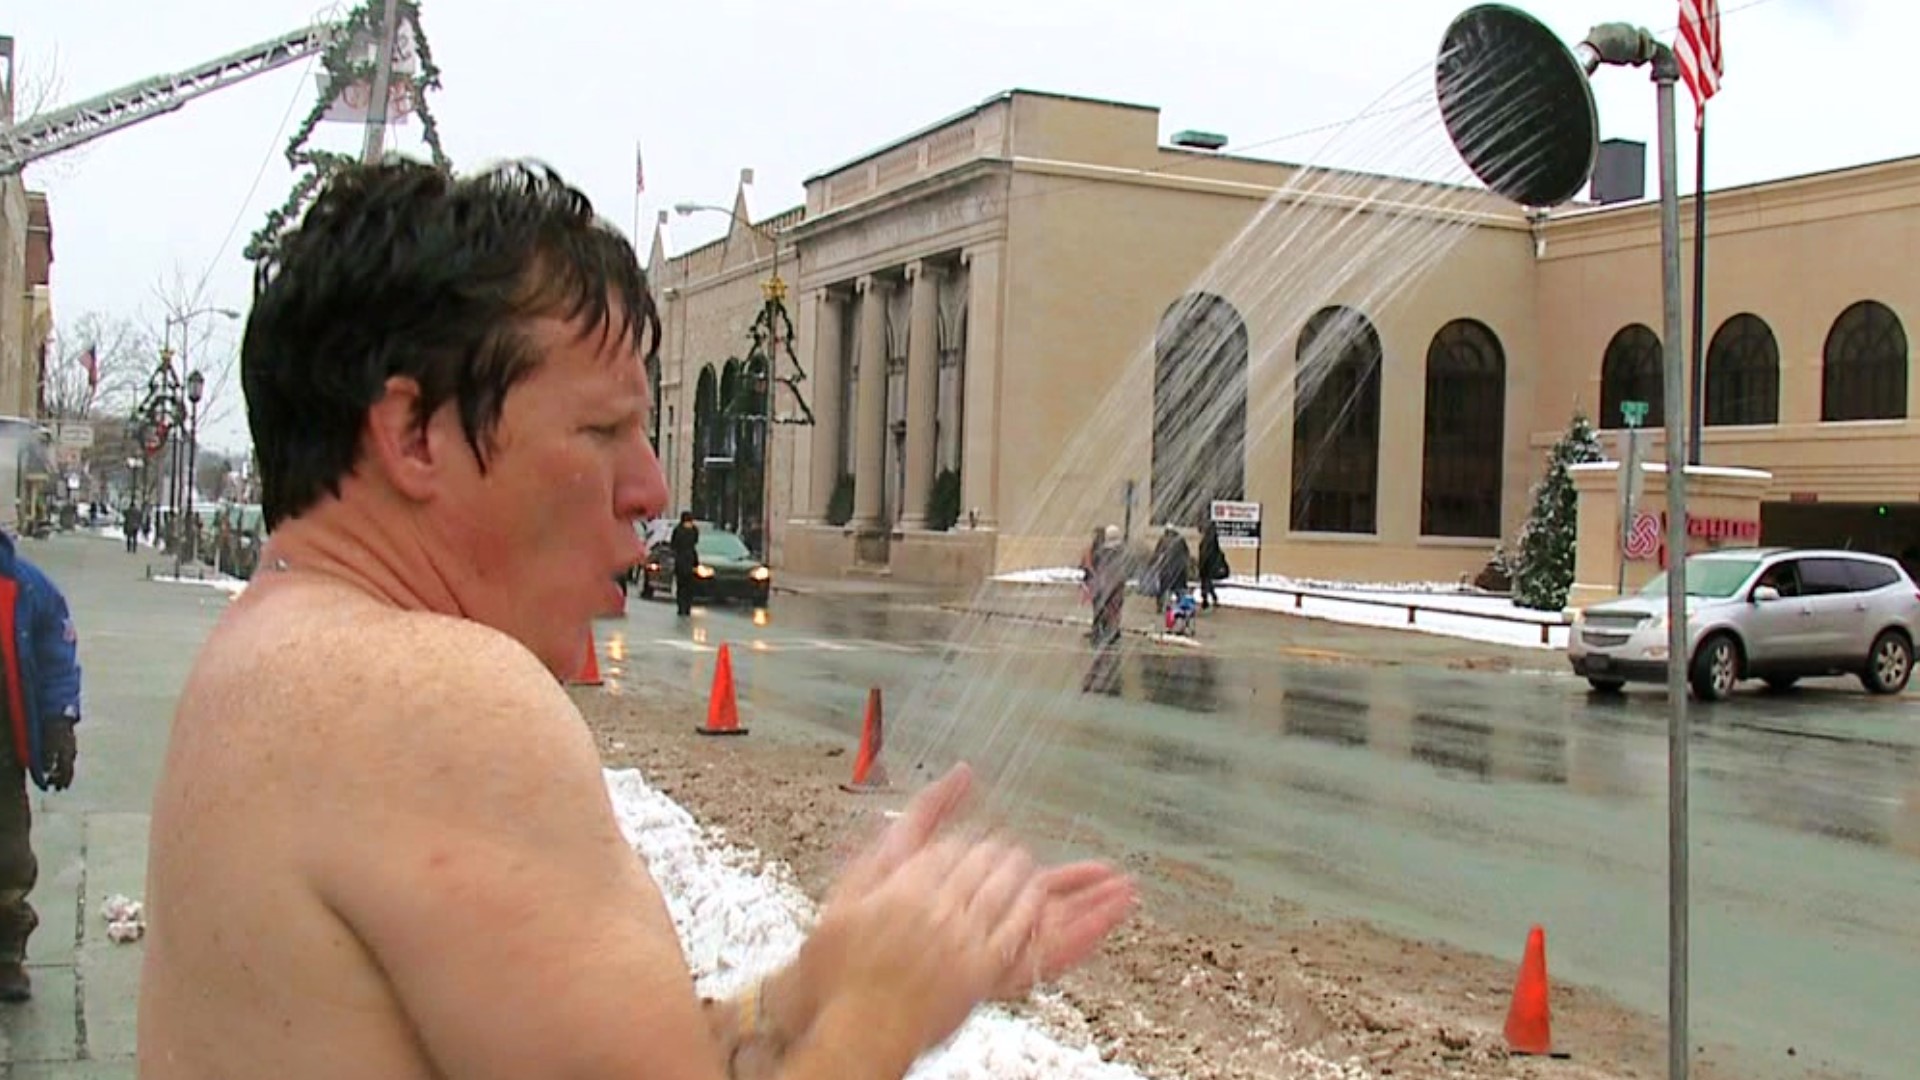 Would you take a shower in the winter weather? Or even take a shower in public? Well, for one man in Honesdale, this is a holiday tradition.